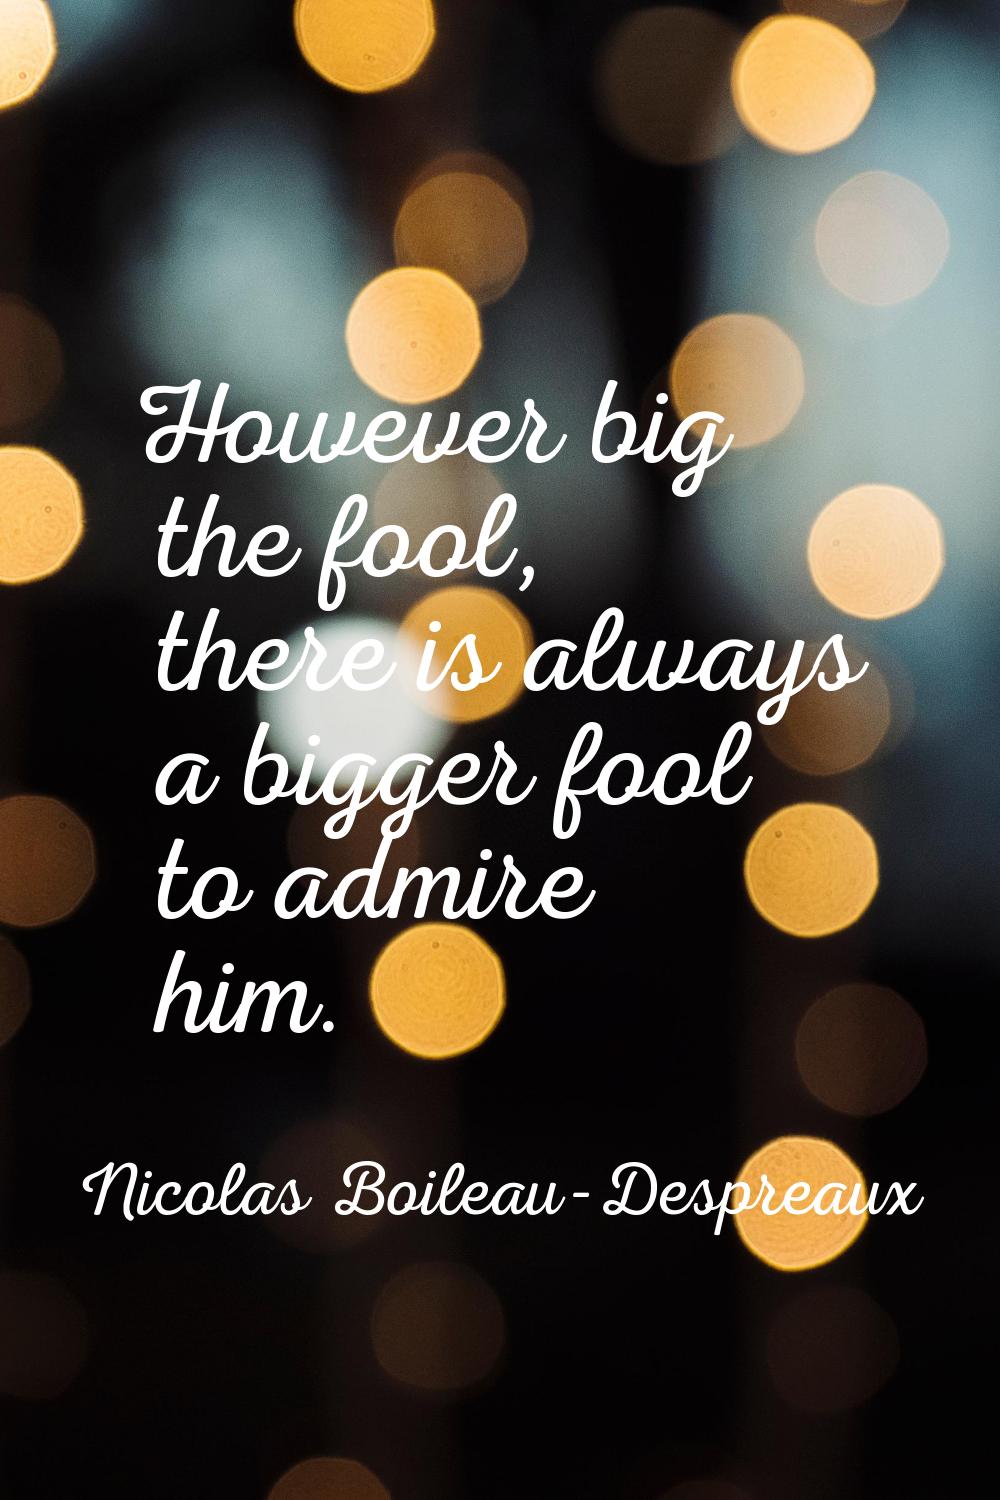 However big the fool, there is always a bigger fool to admire him.